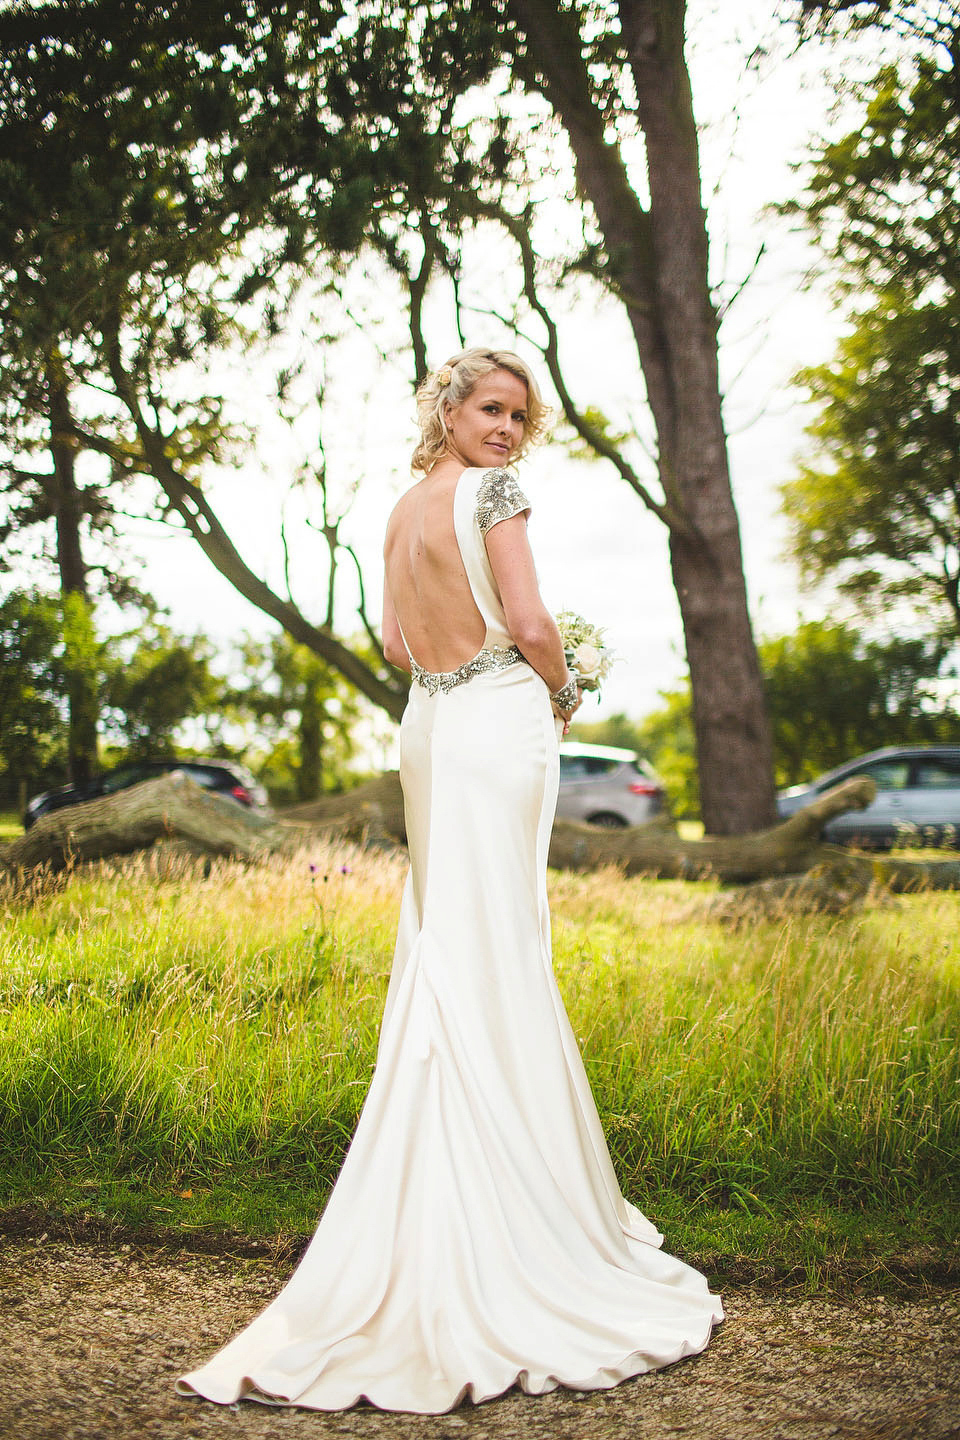 Bride becky wore a Johanna Johnson gown (Australian designer) for her Newton Hall wedding in Northumberland. Images by S6 Photography.